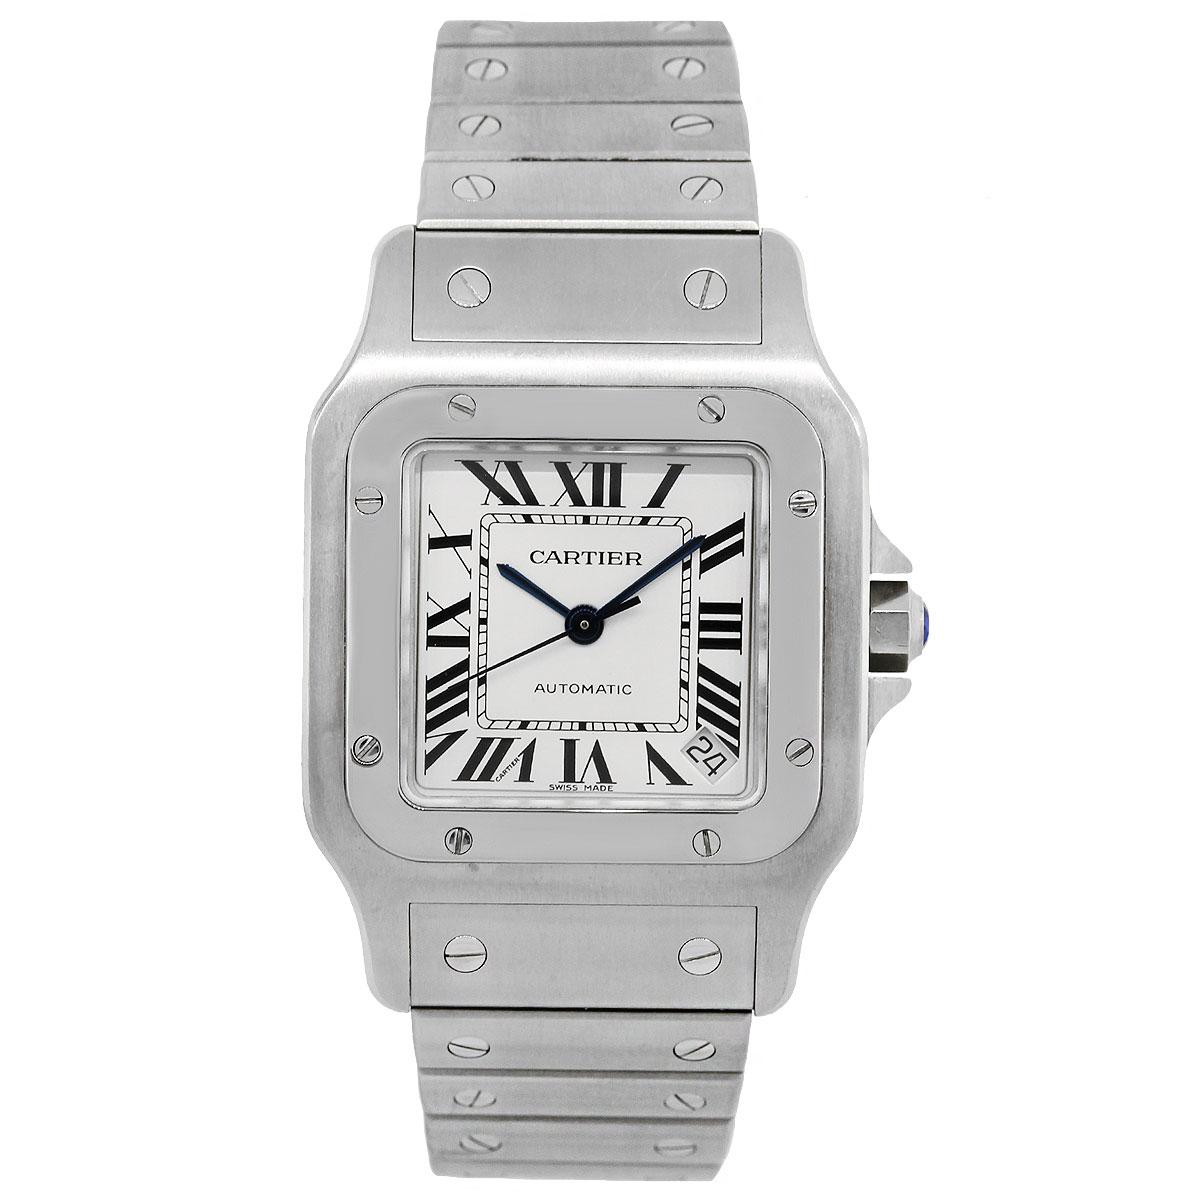 Brand: Cartier
MPN: 2823
Model: Santos Galbee
Case Material: Stainless Steel
Case Diameter: 32mm
Bezel: Stainless Steel smooth bezel
Dial: White dial with black roman numeral hour markers, blue hands and a date window displayed in between 4 and 5